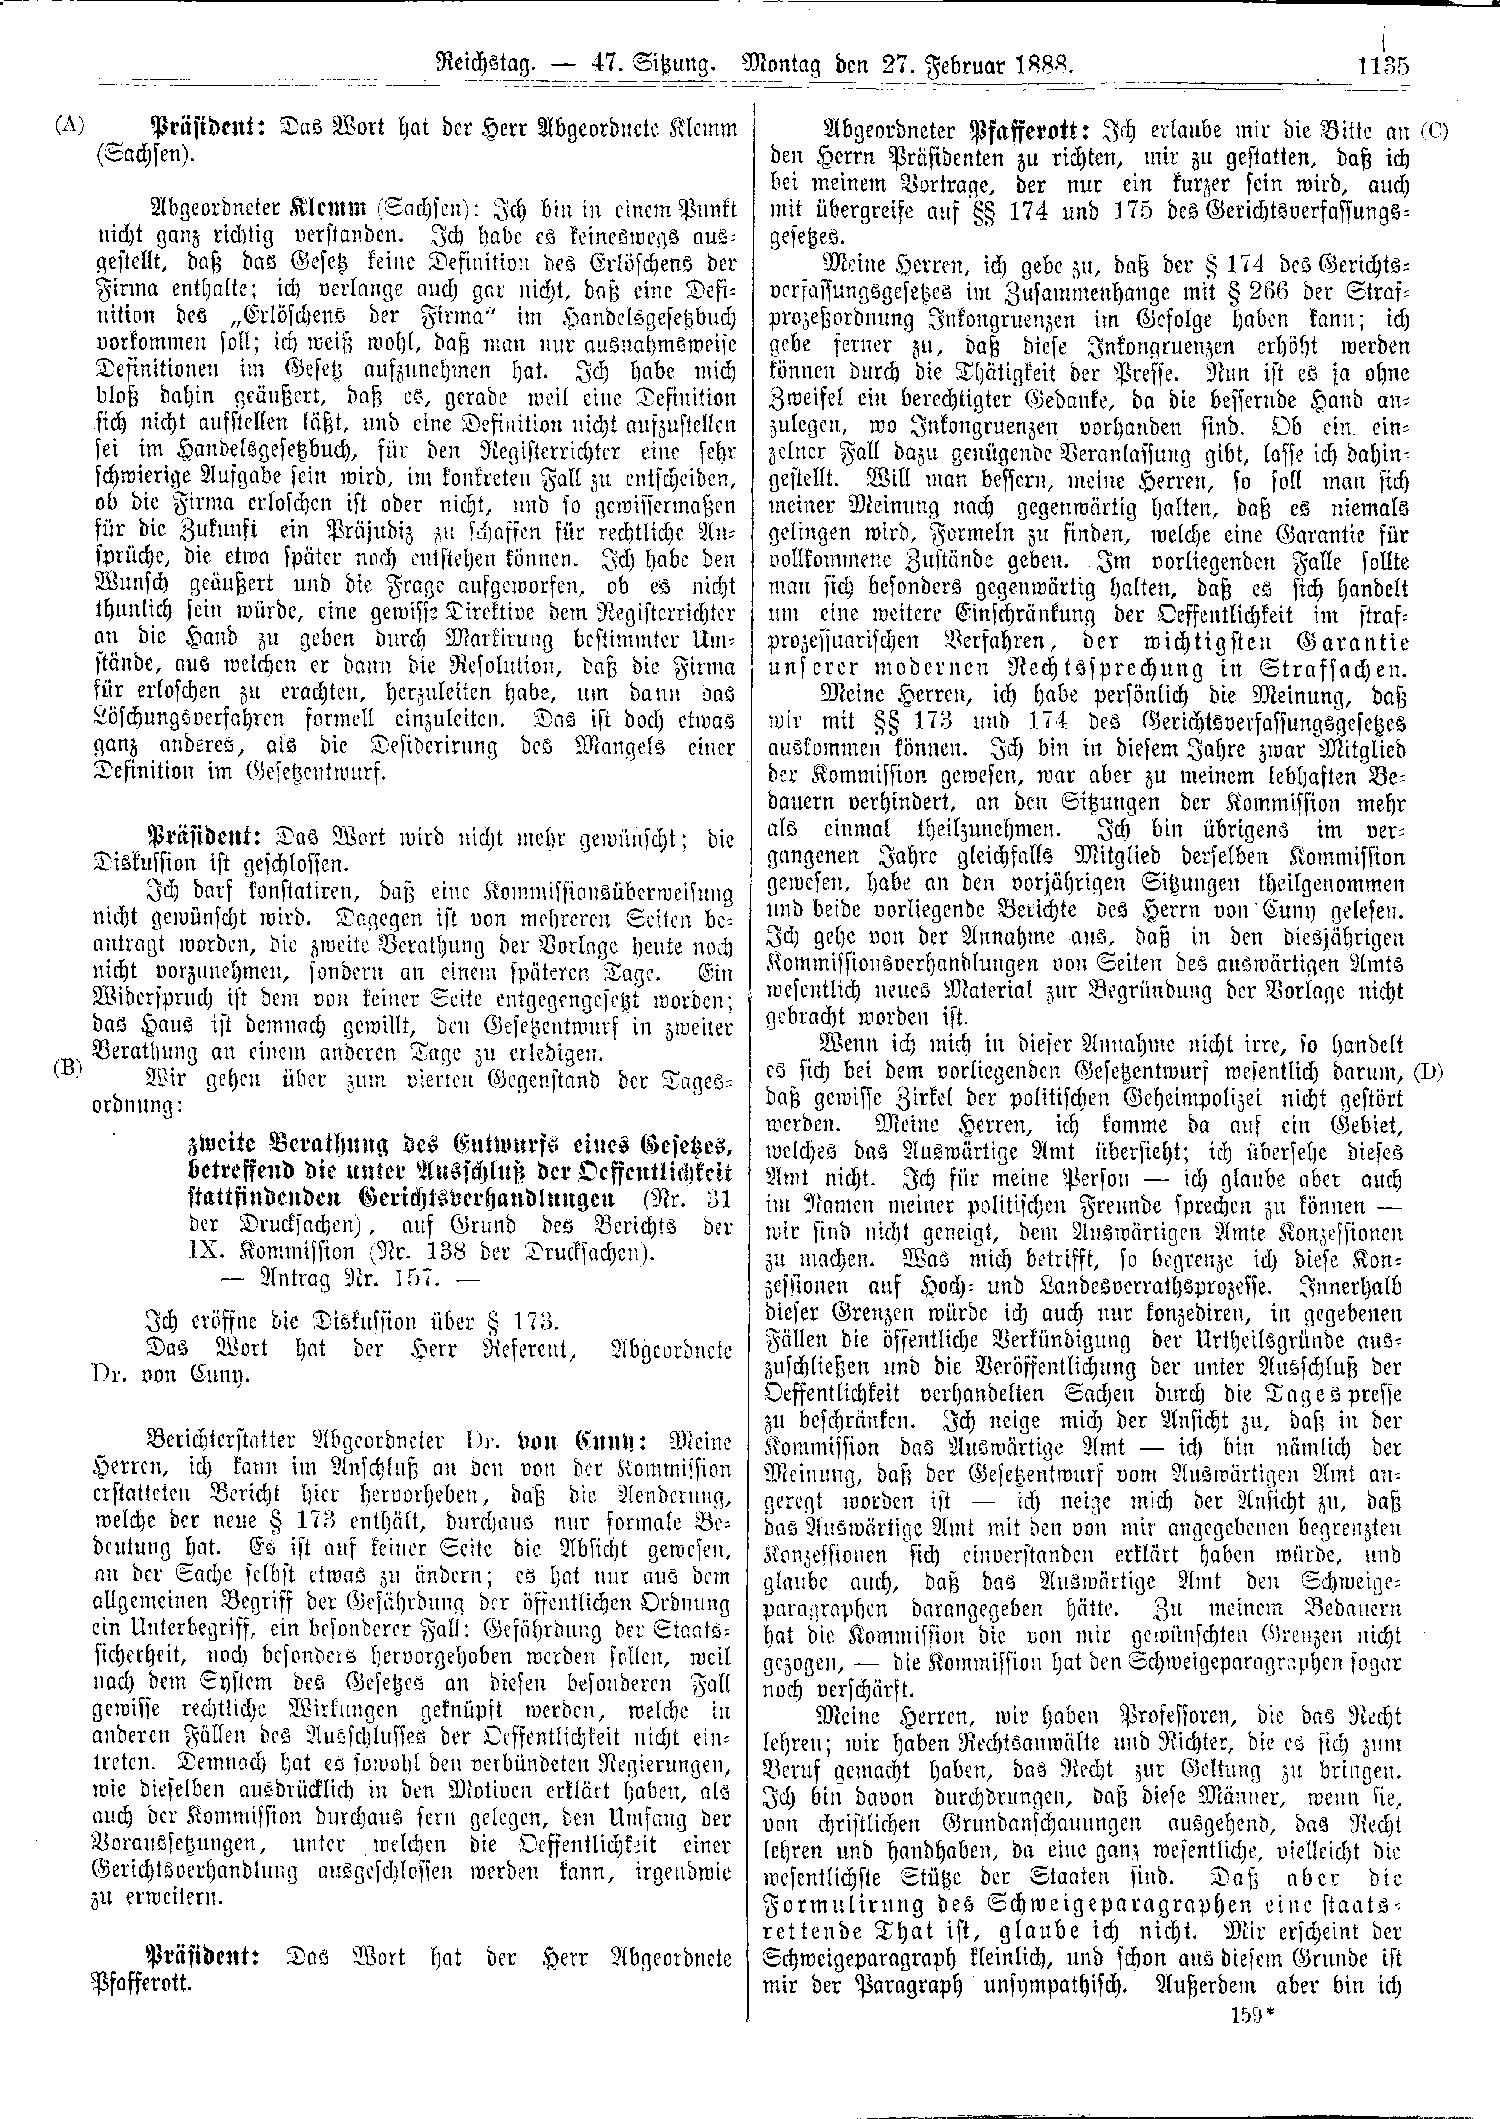 Scan of page 1135